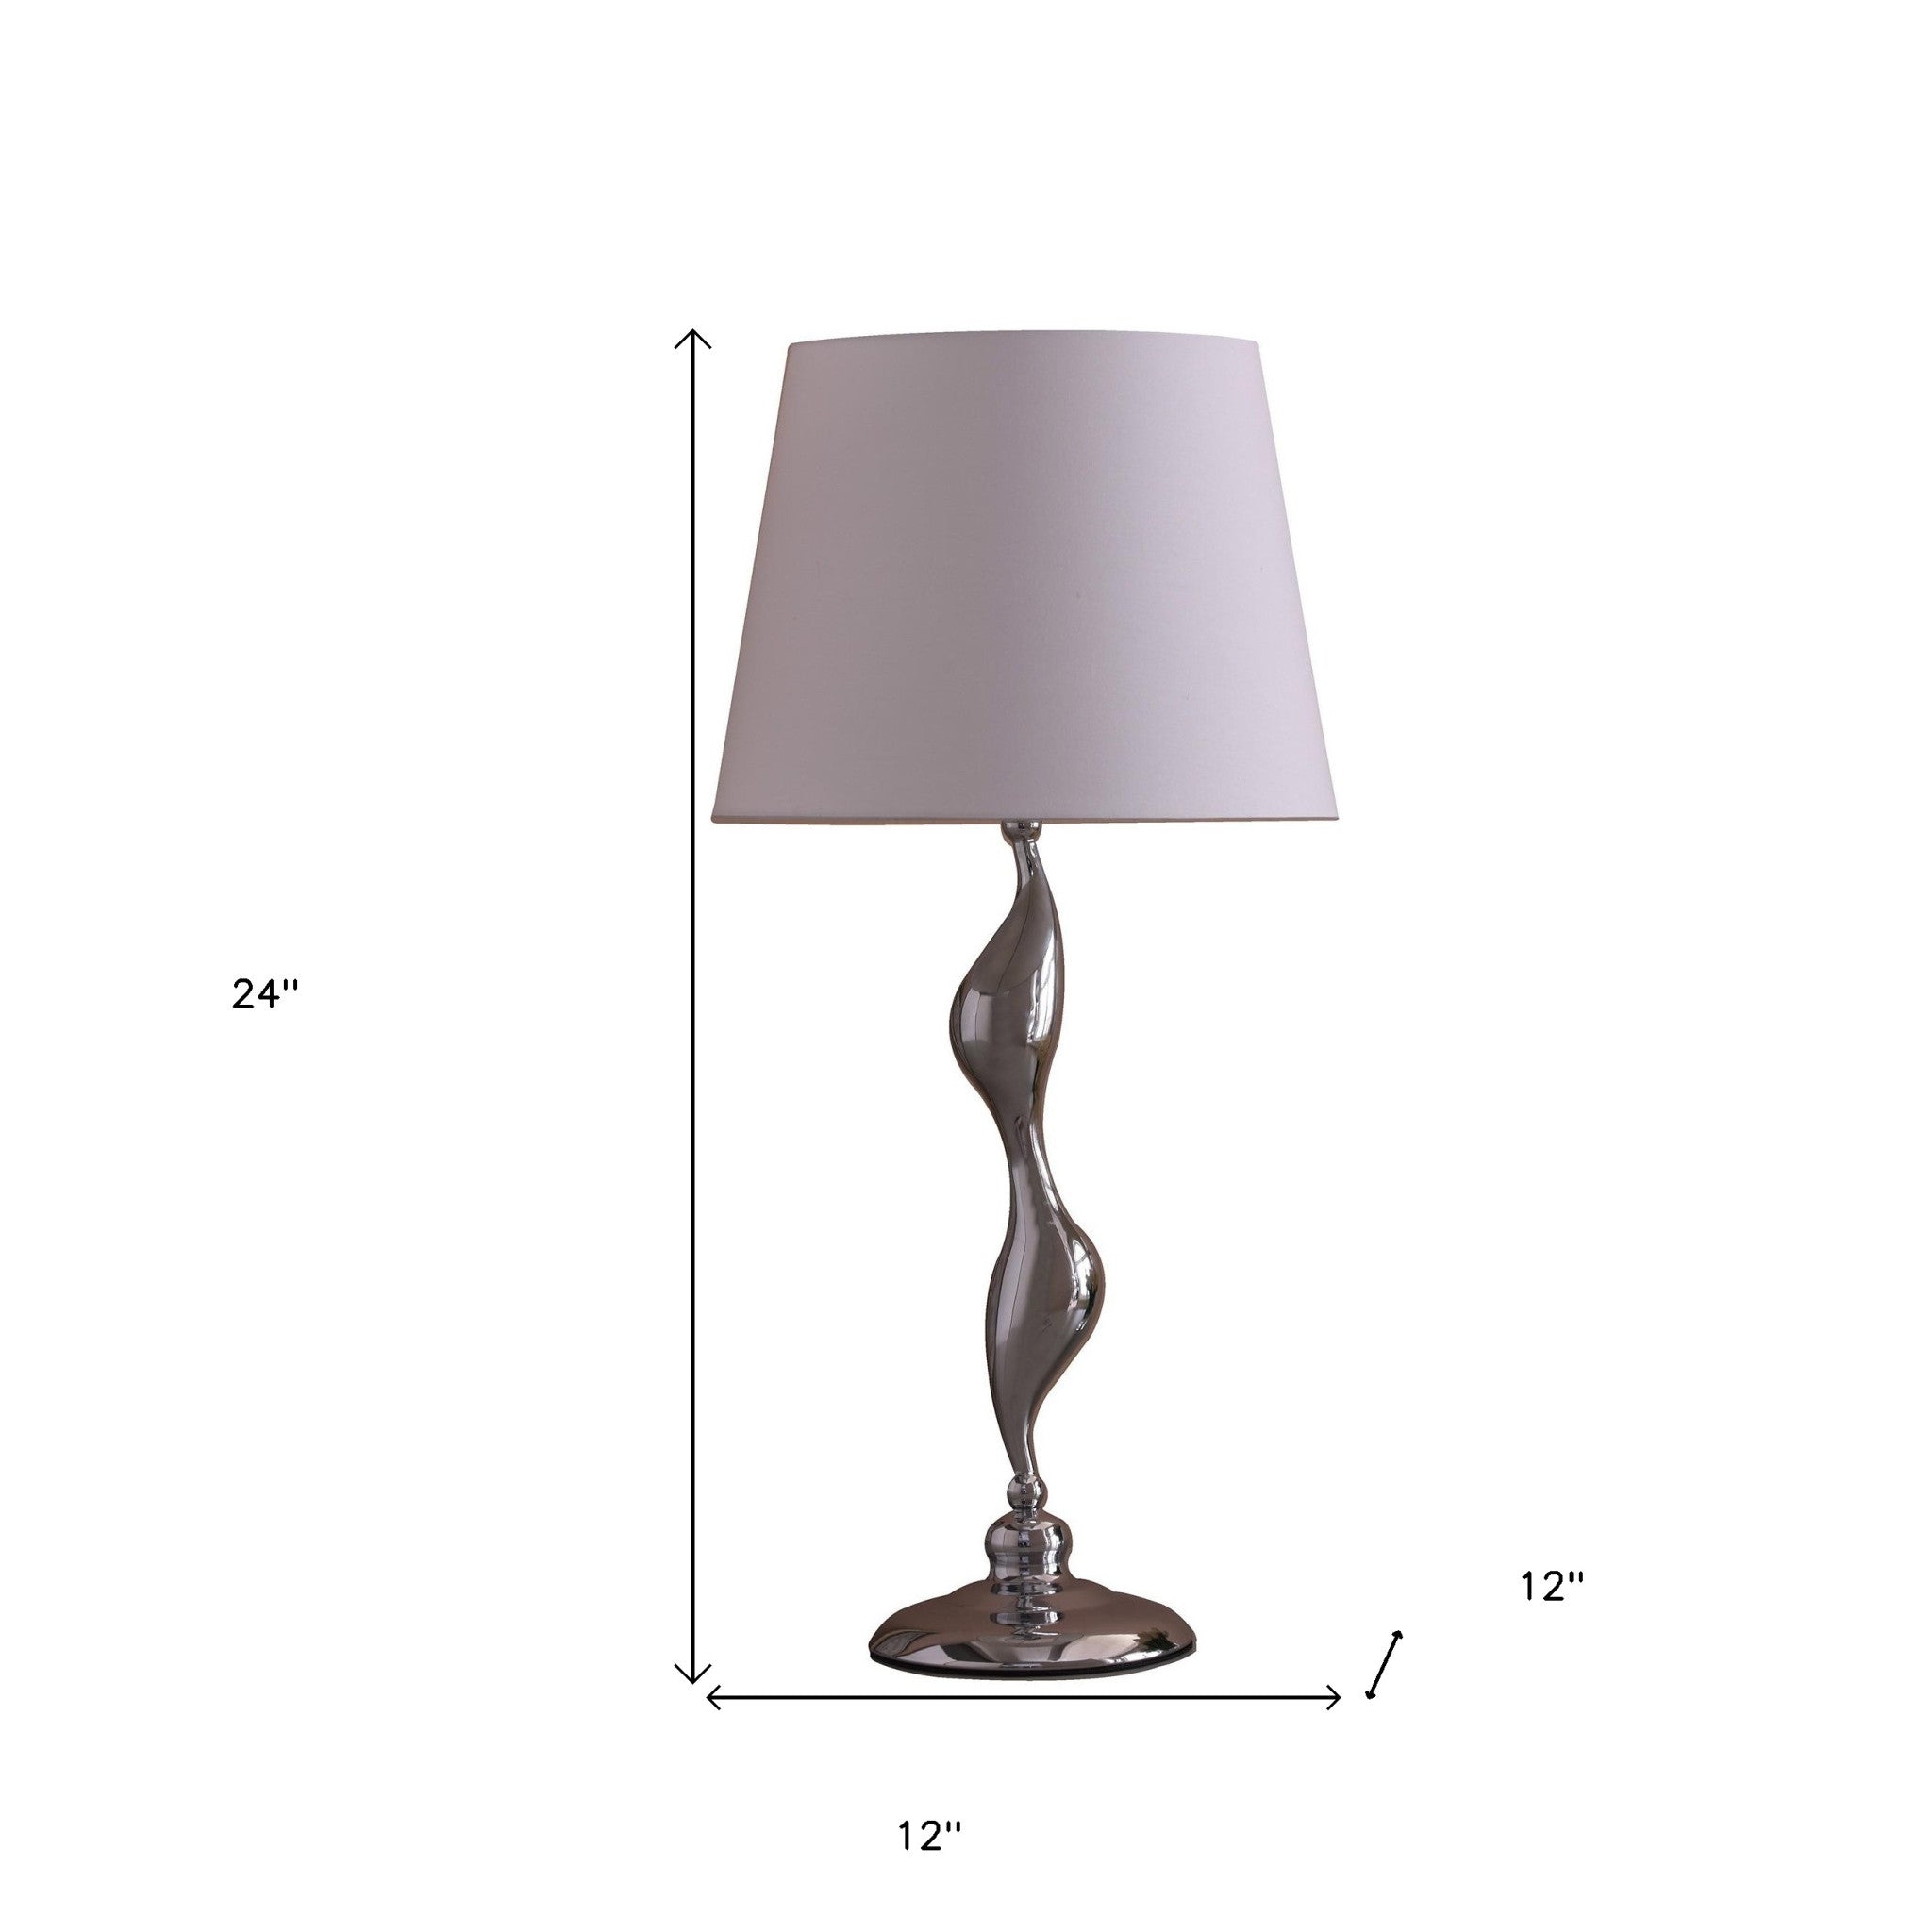 24" Silver Bedside Table Lamp With White Empire Shade